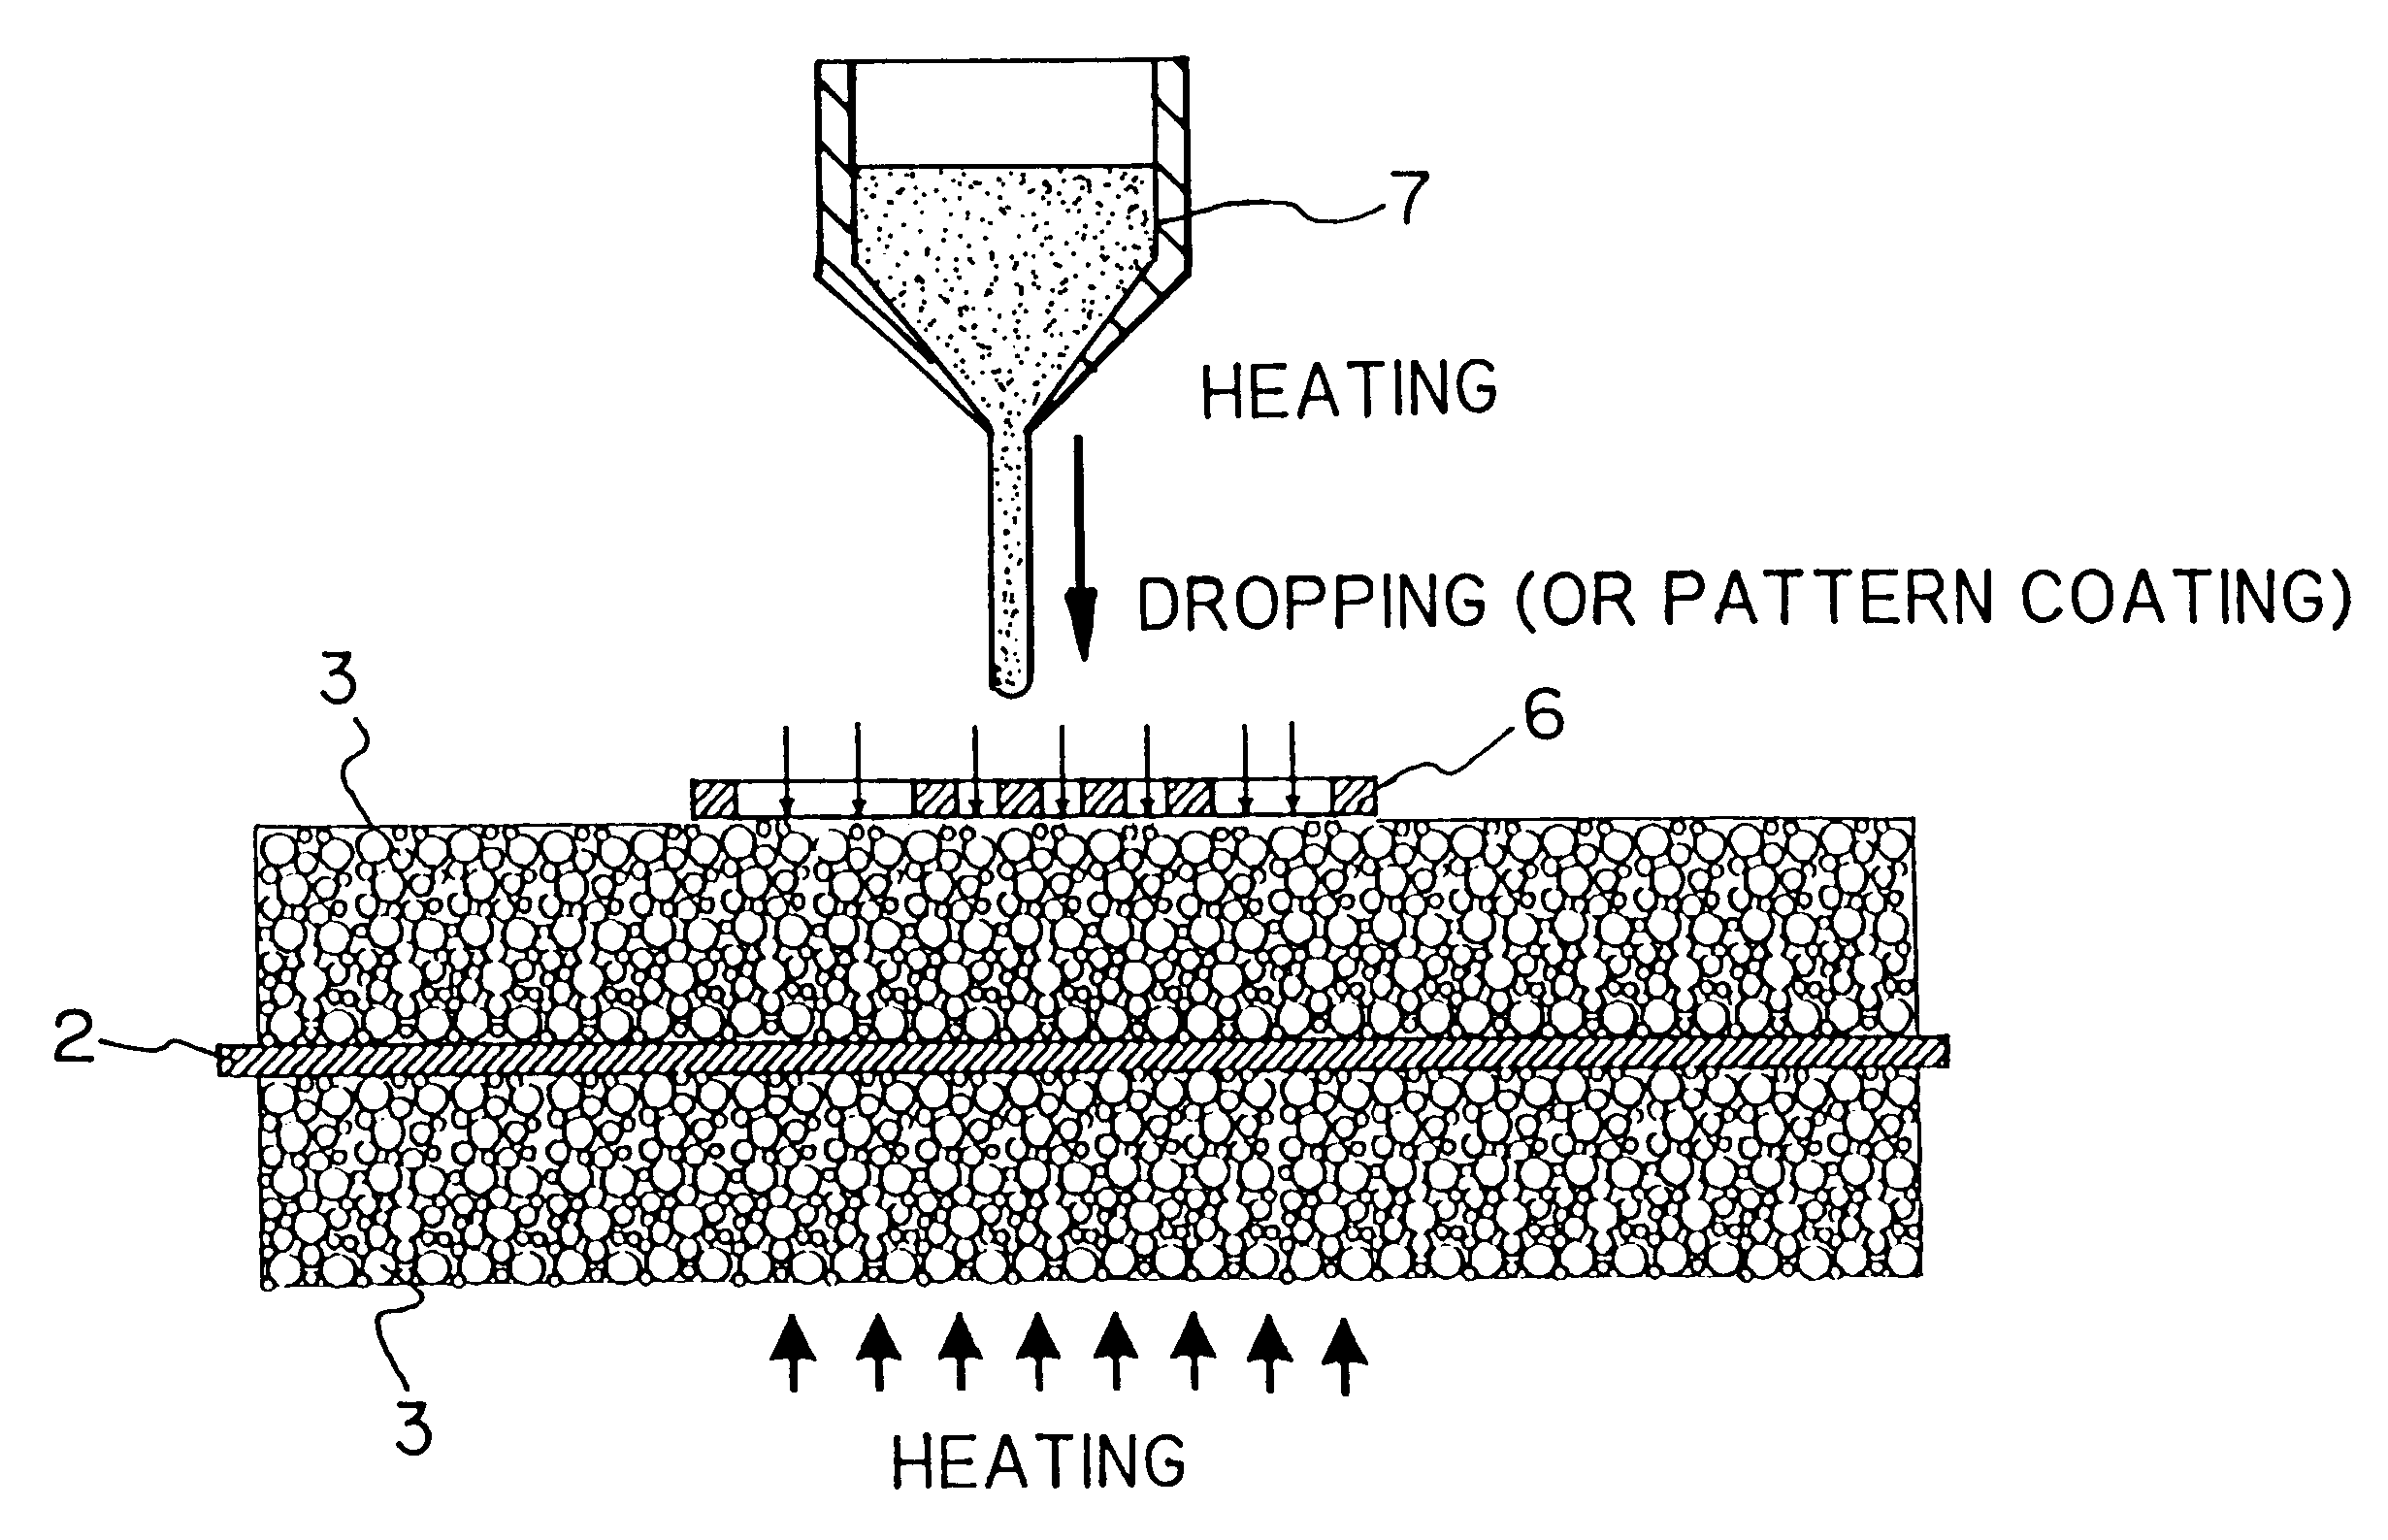 Process for producing an electrode plate with a terminal mounting portion and/or an identification mark